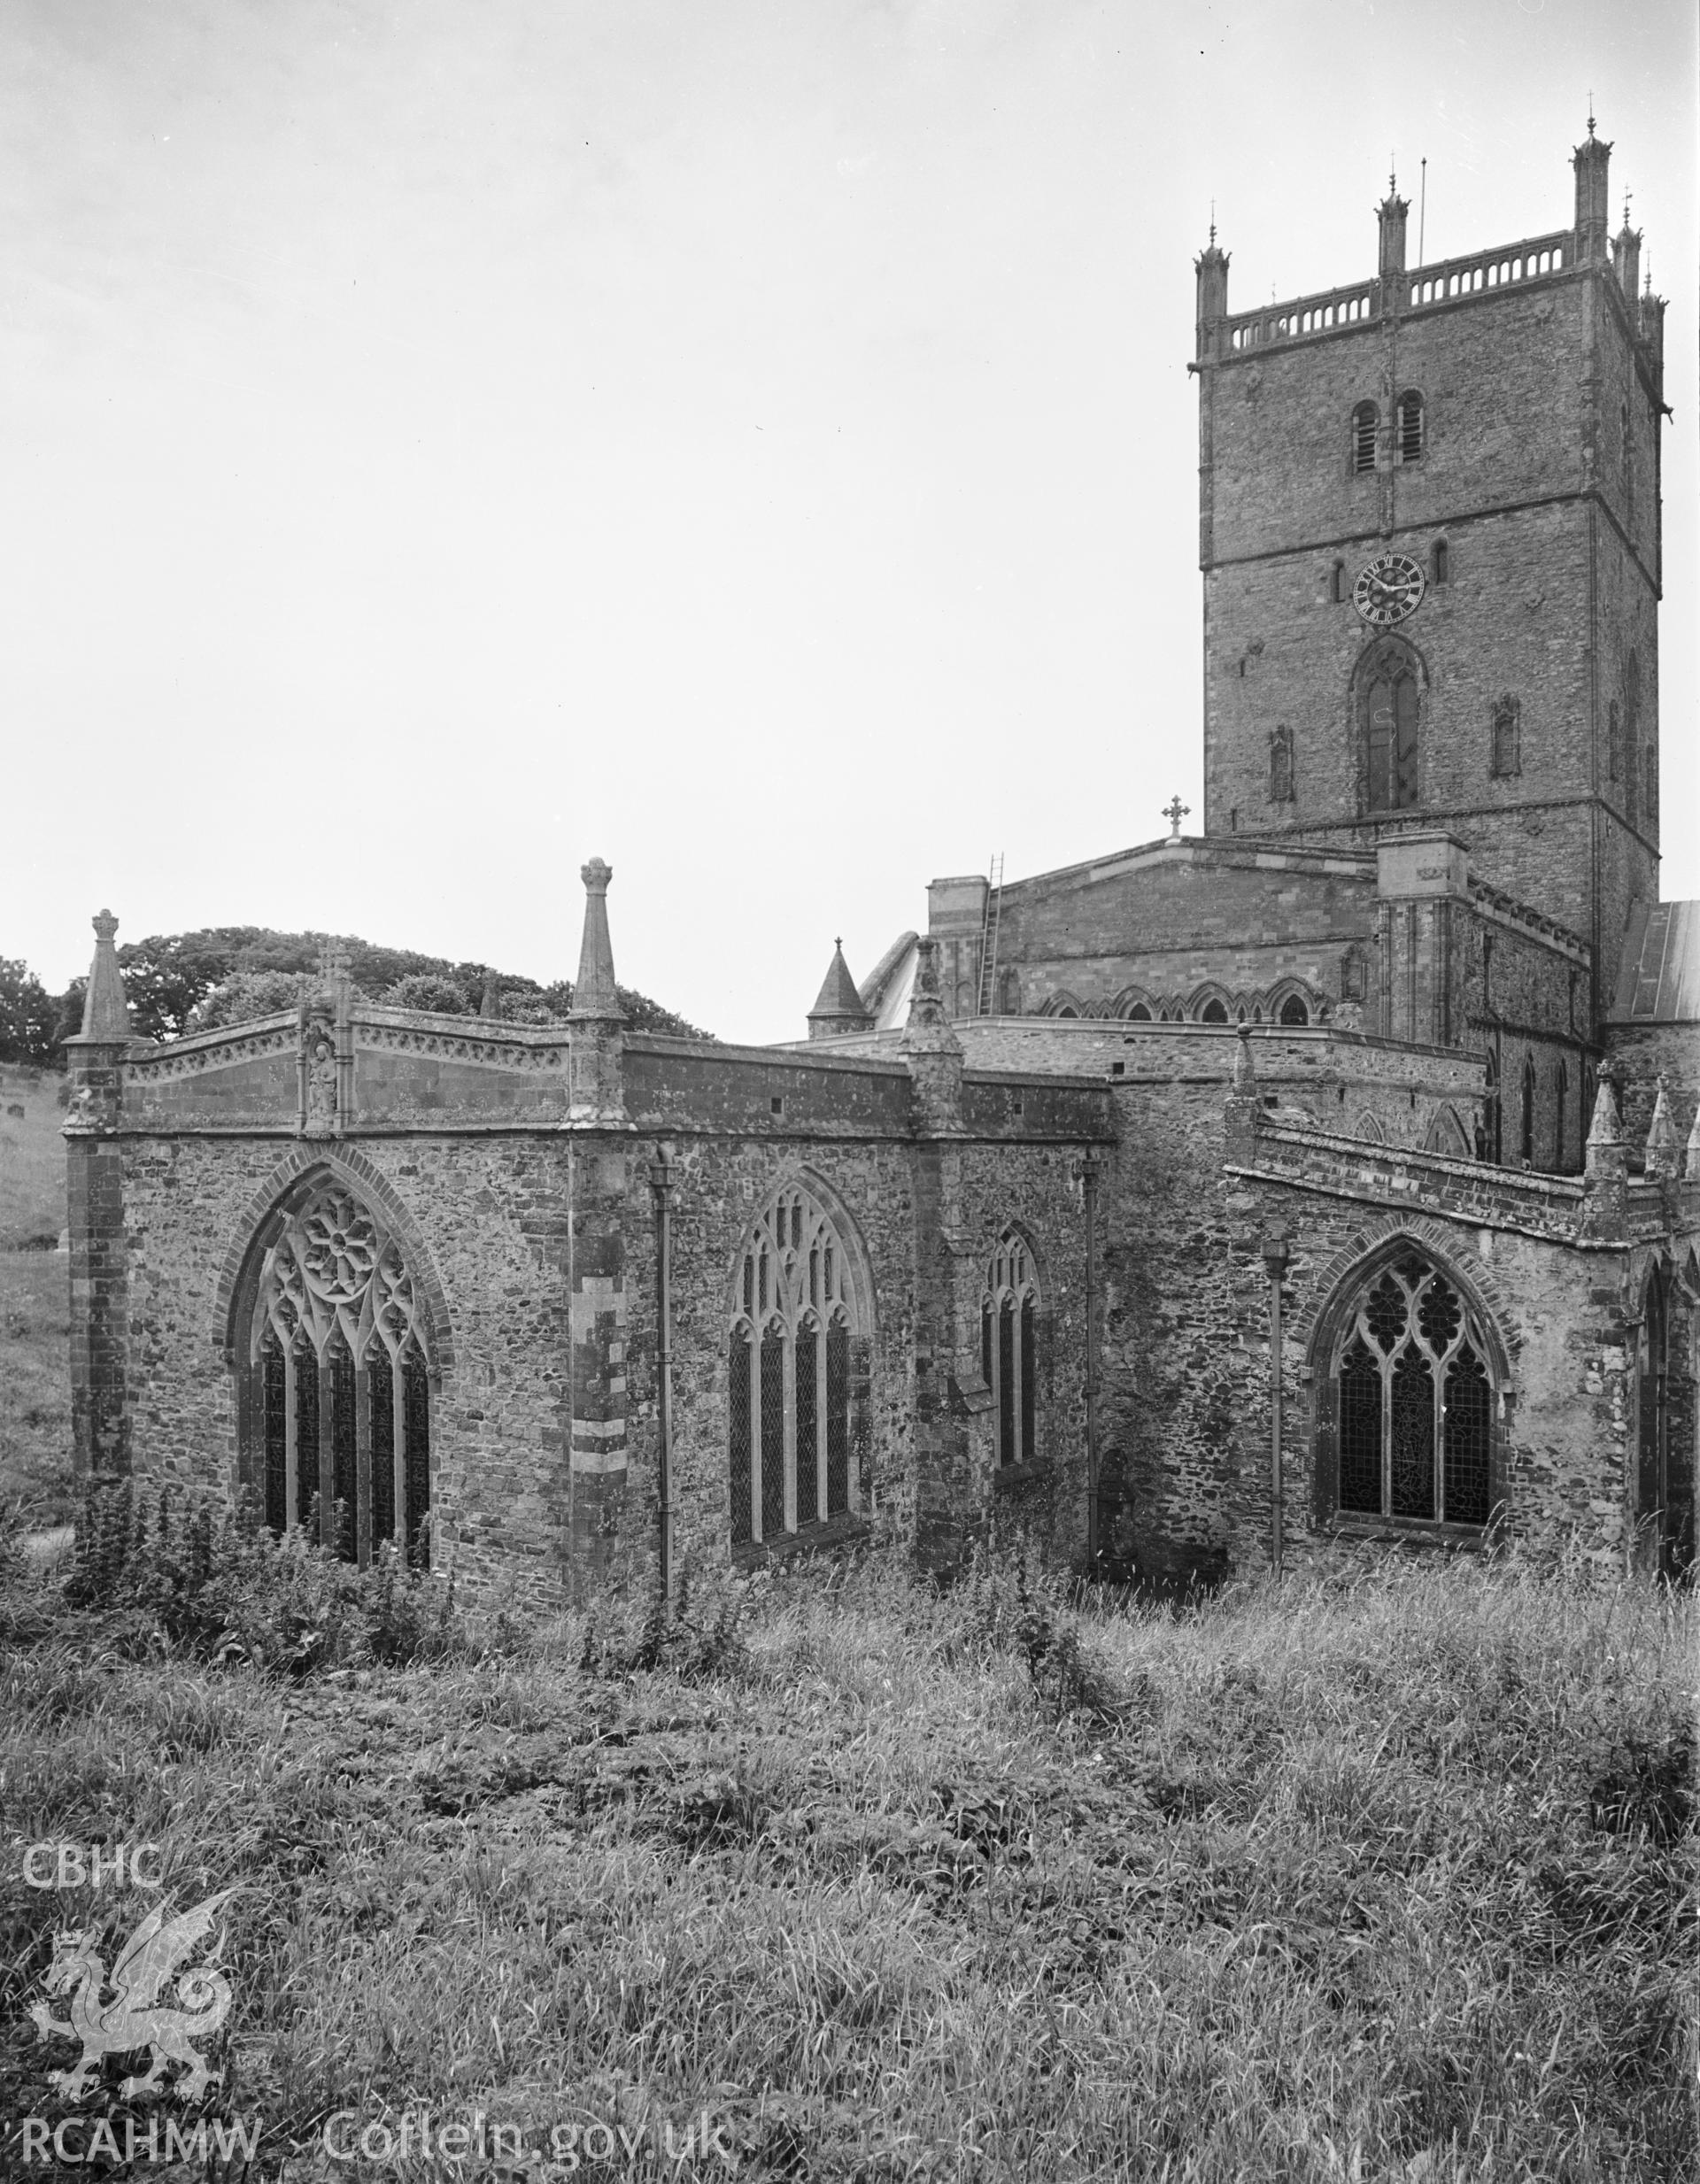 Exterior view showing view of the Lady Chapel from the north-east.